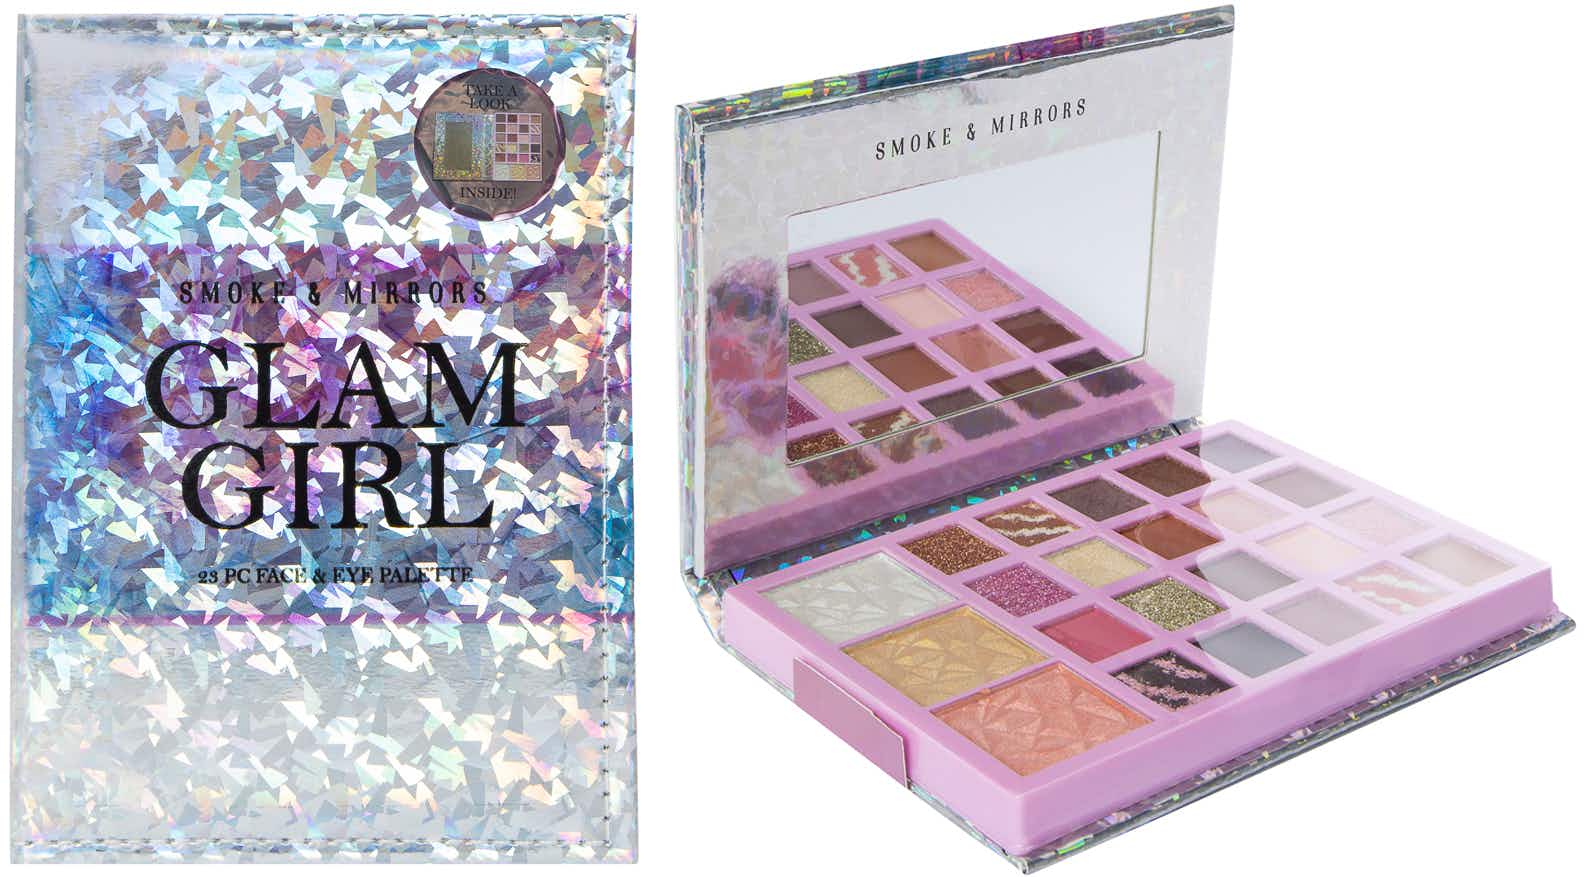 five below gift sets - A Smoke & Mirrors Glam Girl Face & Eye Palette on a white background